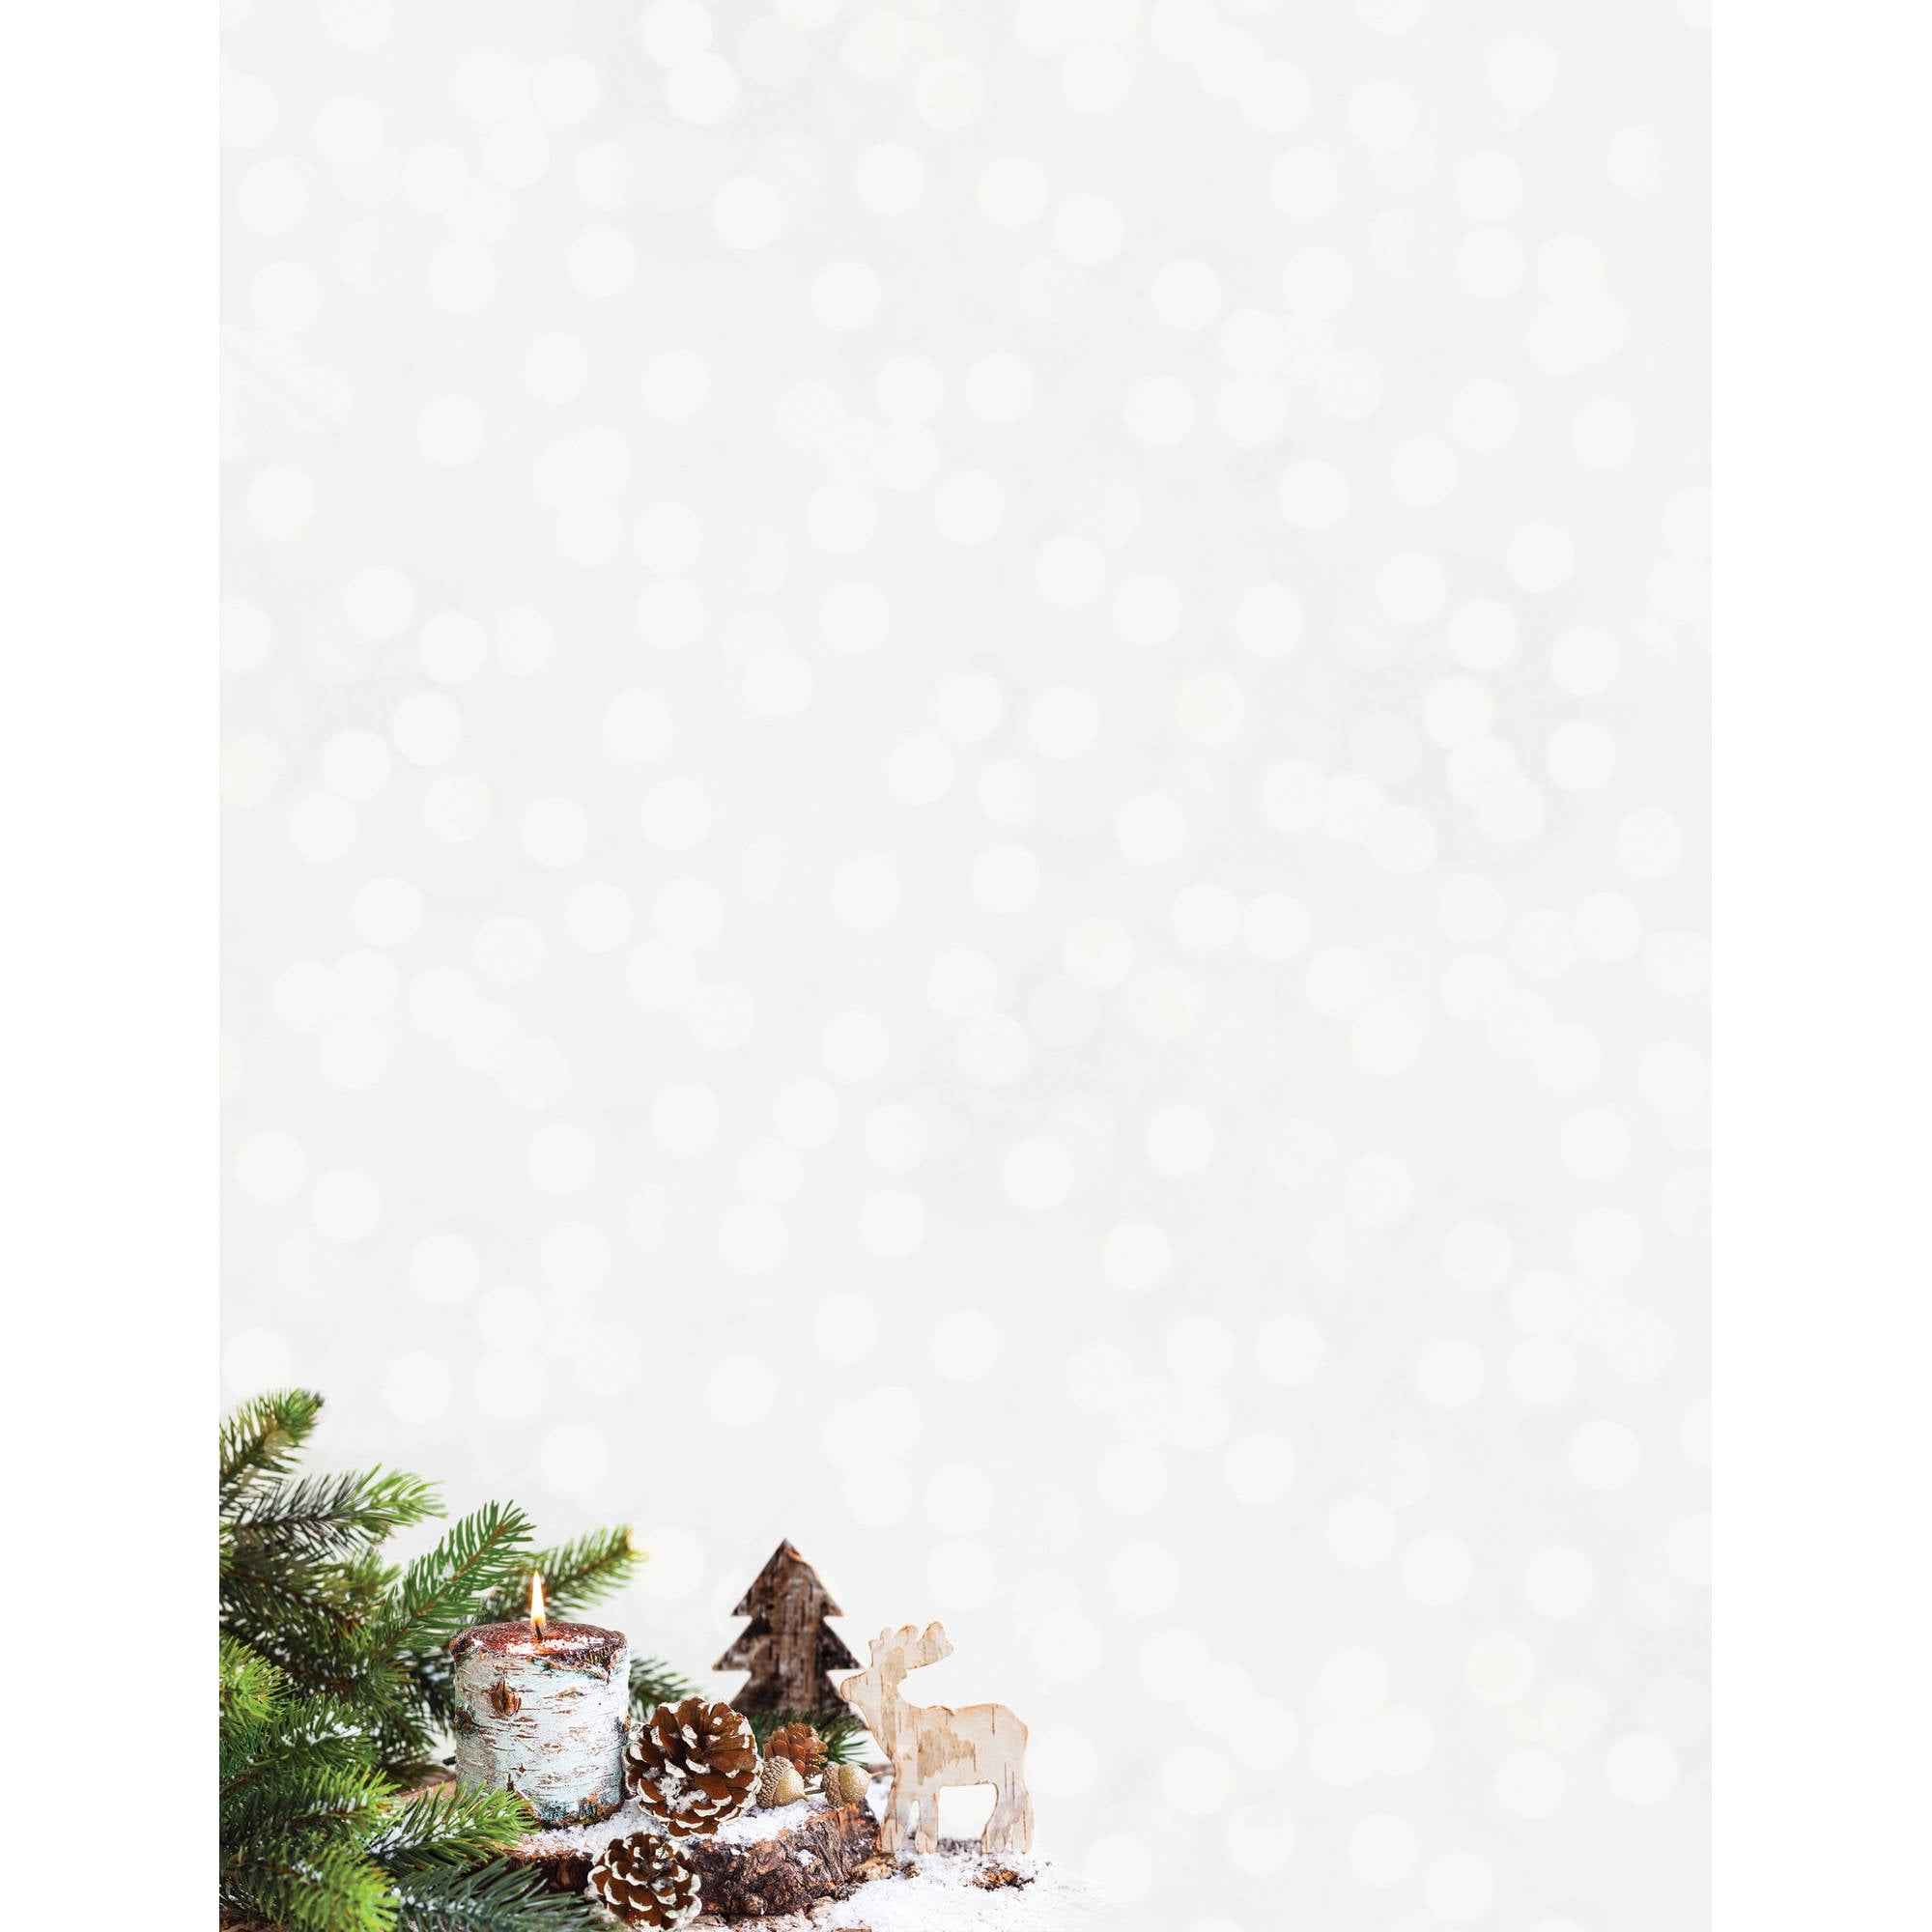 80 Sheets of Letterhead for Winter & Holiday Events Reindeer Christmas Stationery Paper